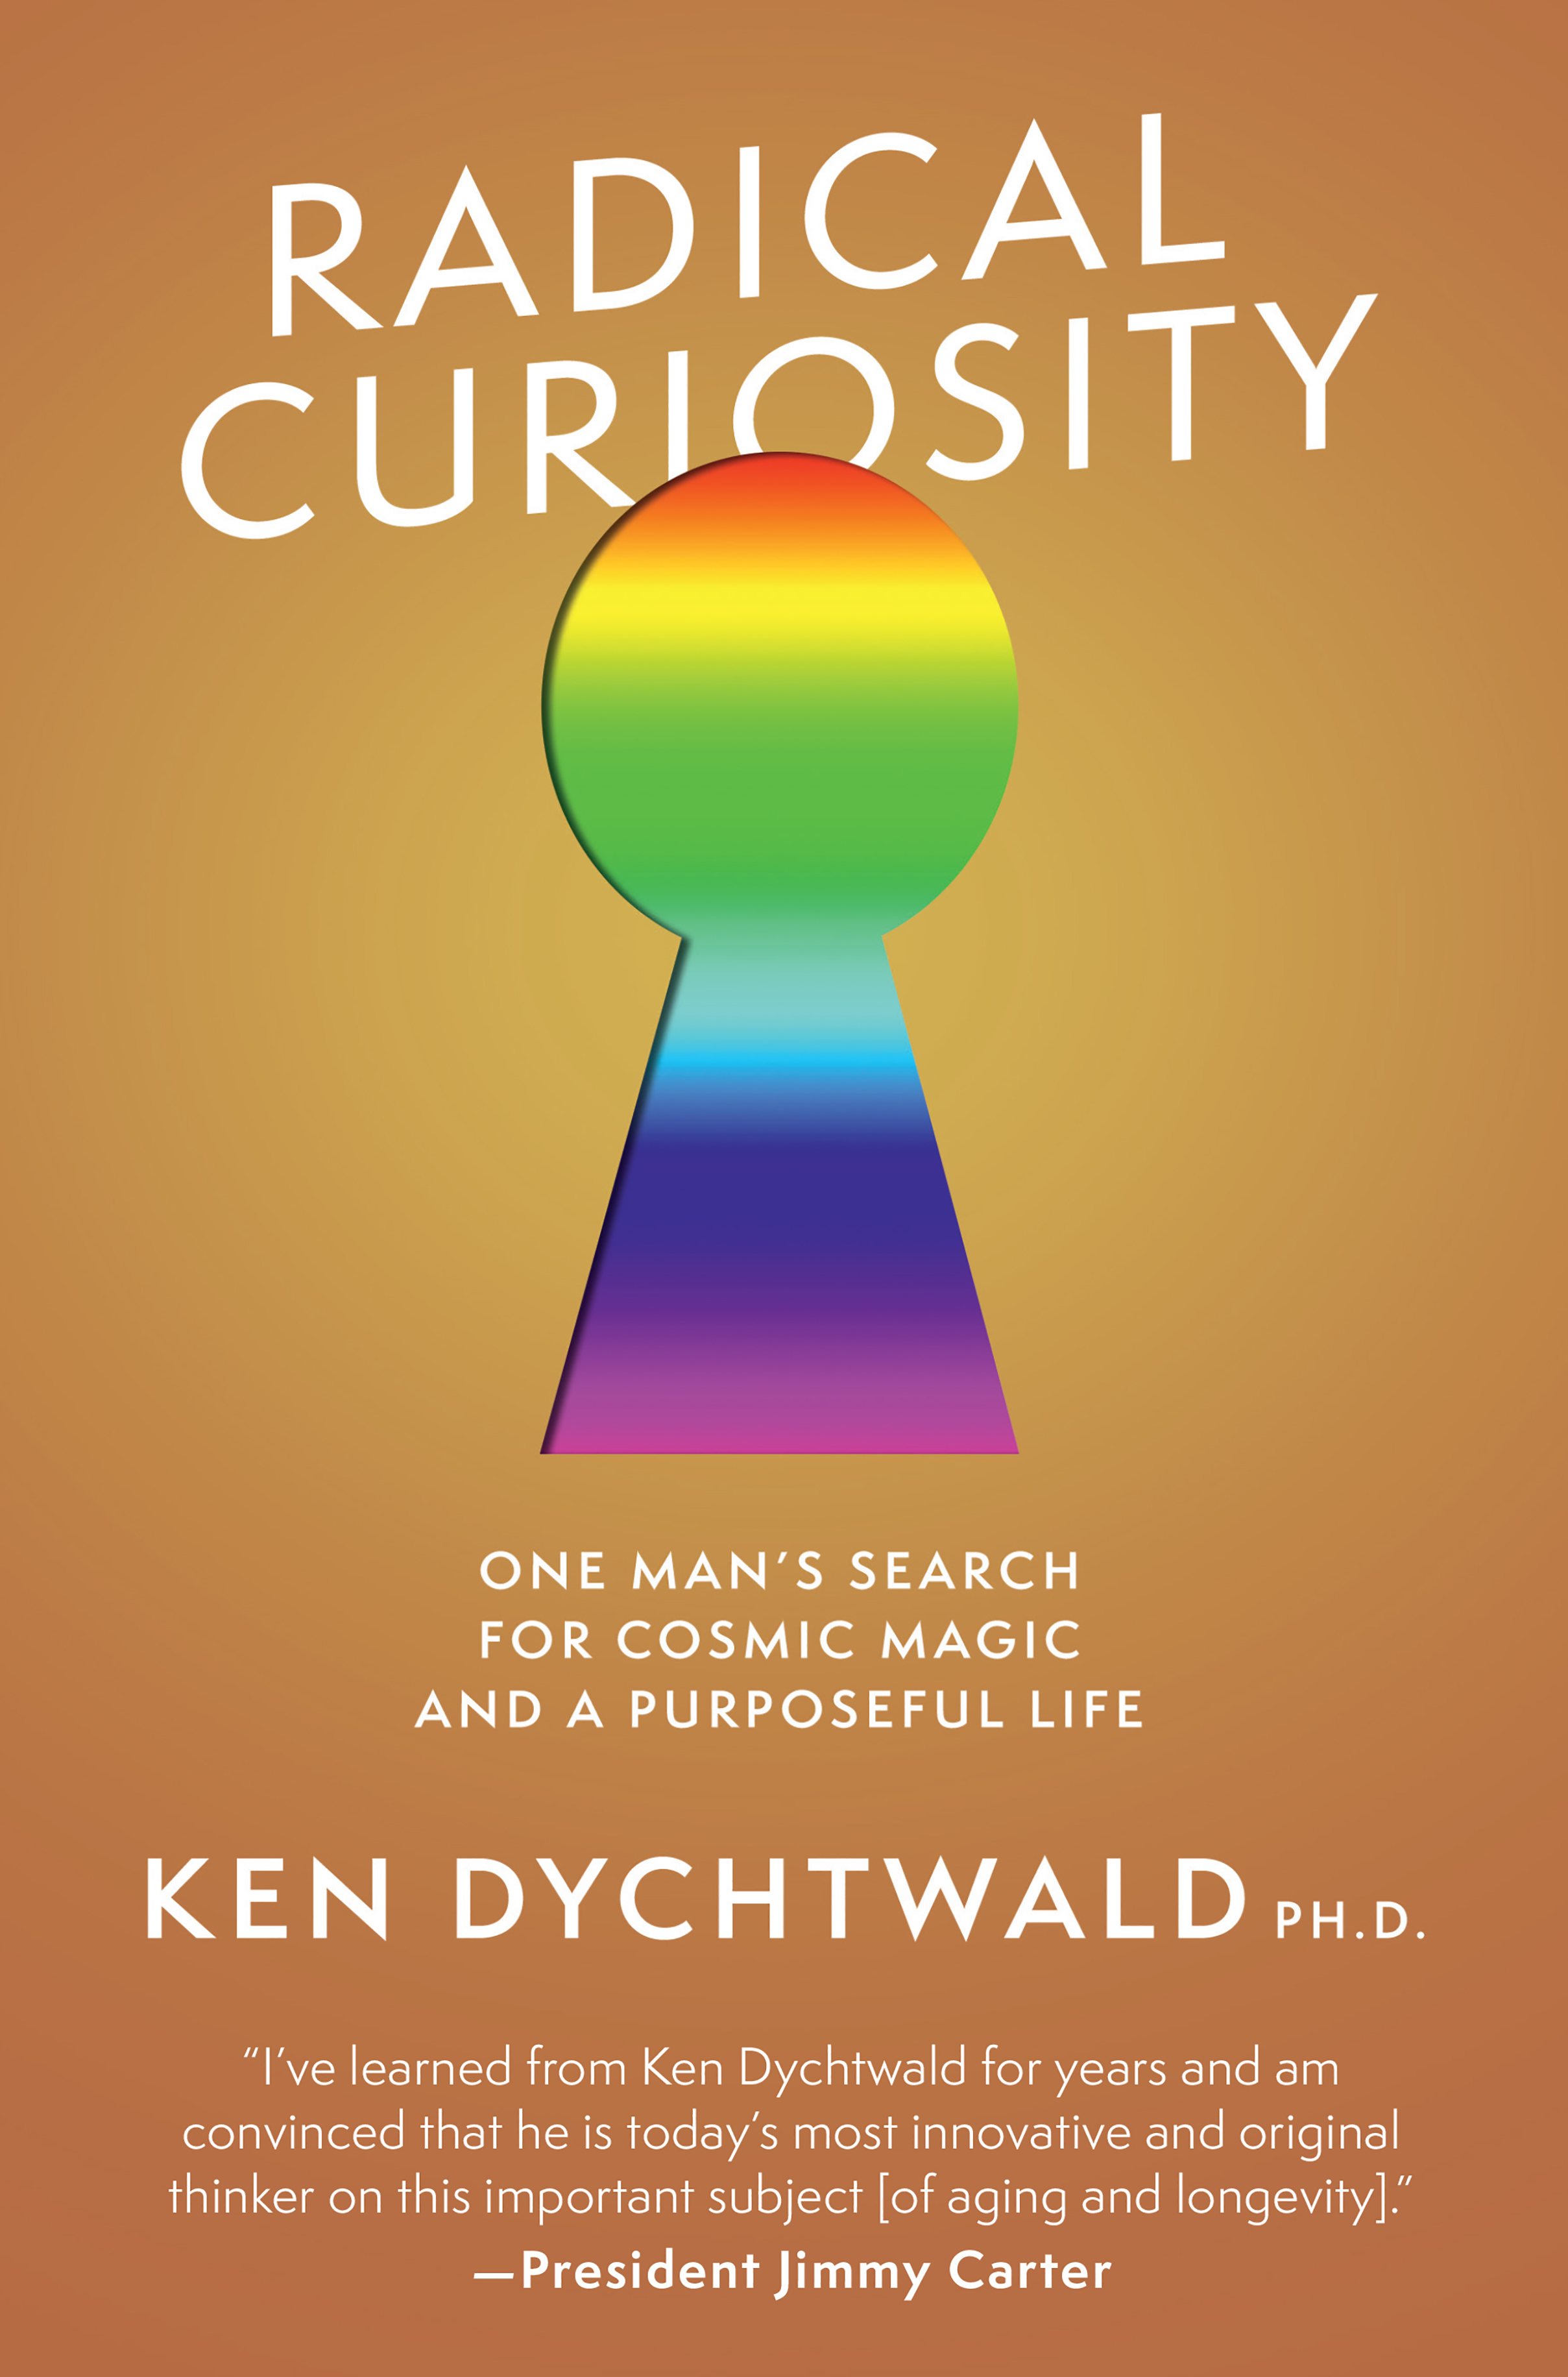 RADICAL CURIOSITY: ONE MAN’S SEARCH FOR COSMIC MAGIC AND A PURPOSEFUL LIFE BY KEN DYCHTWALD